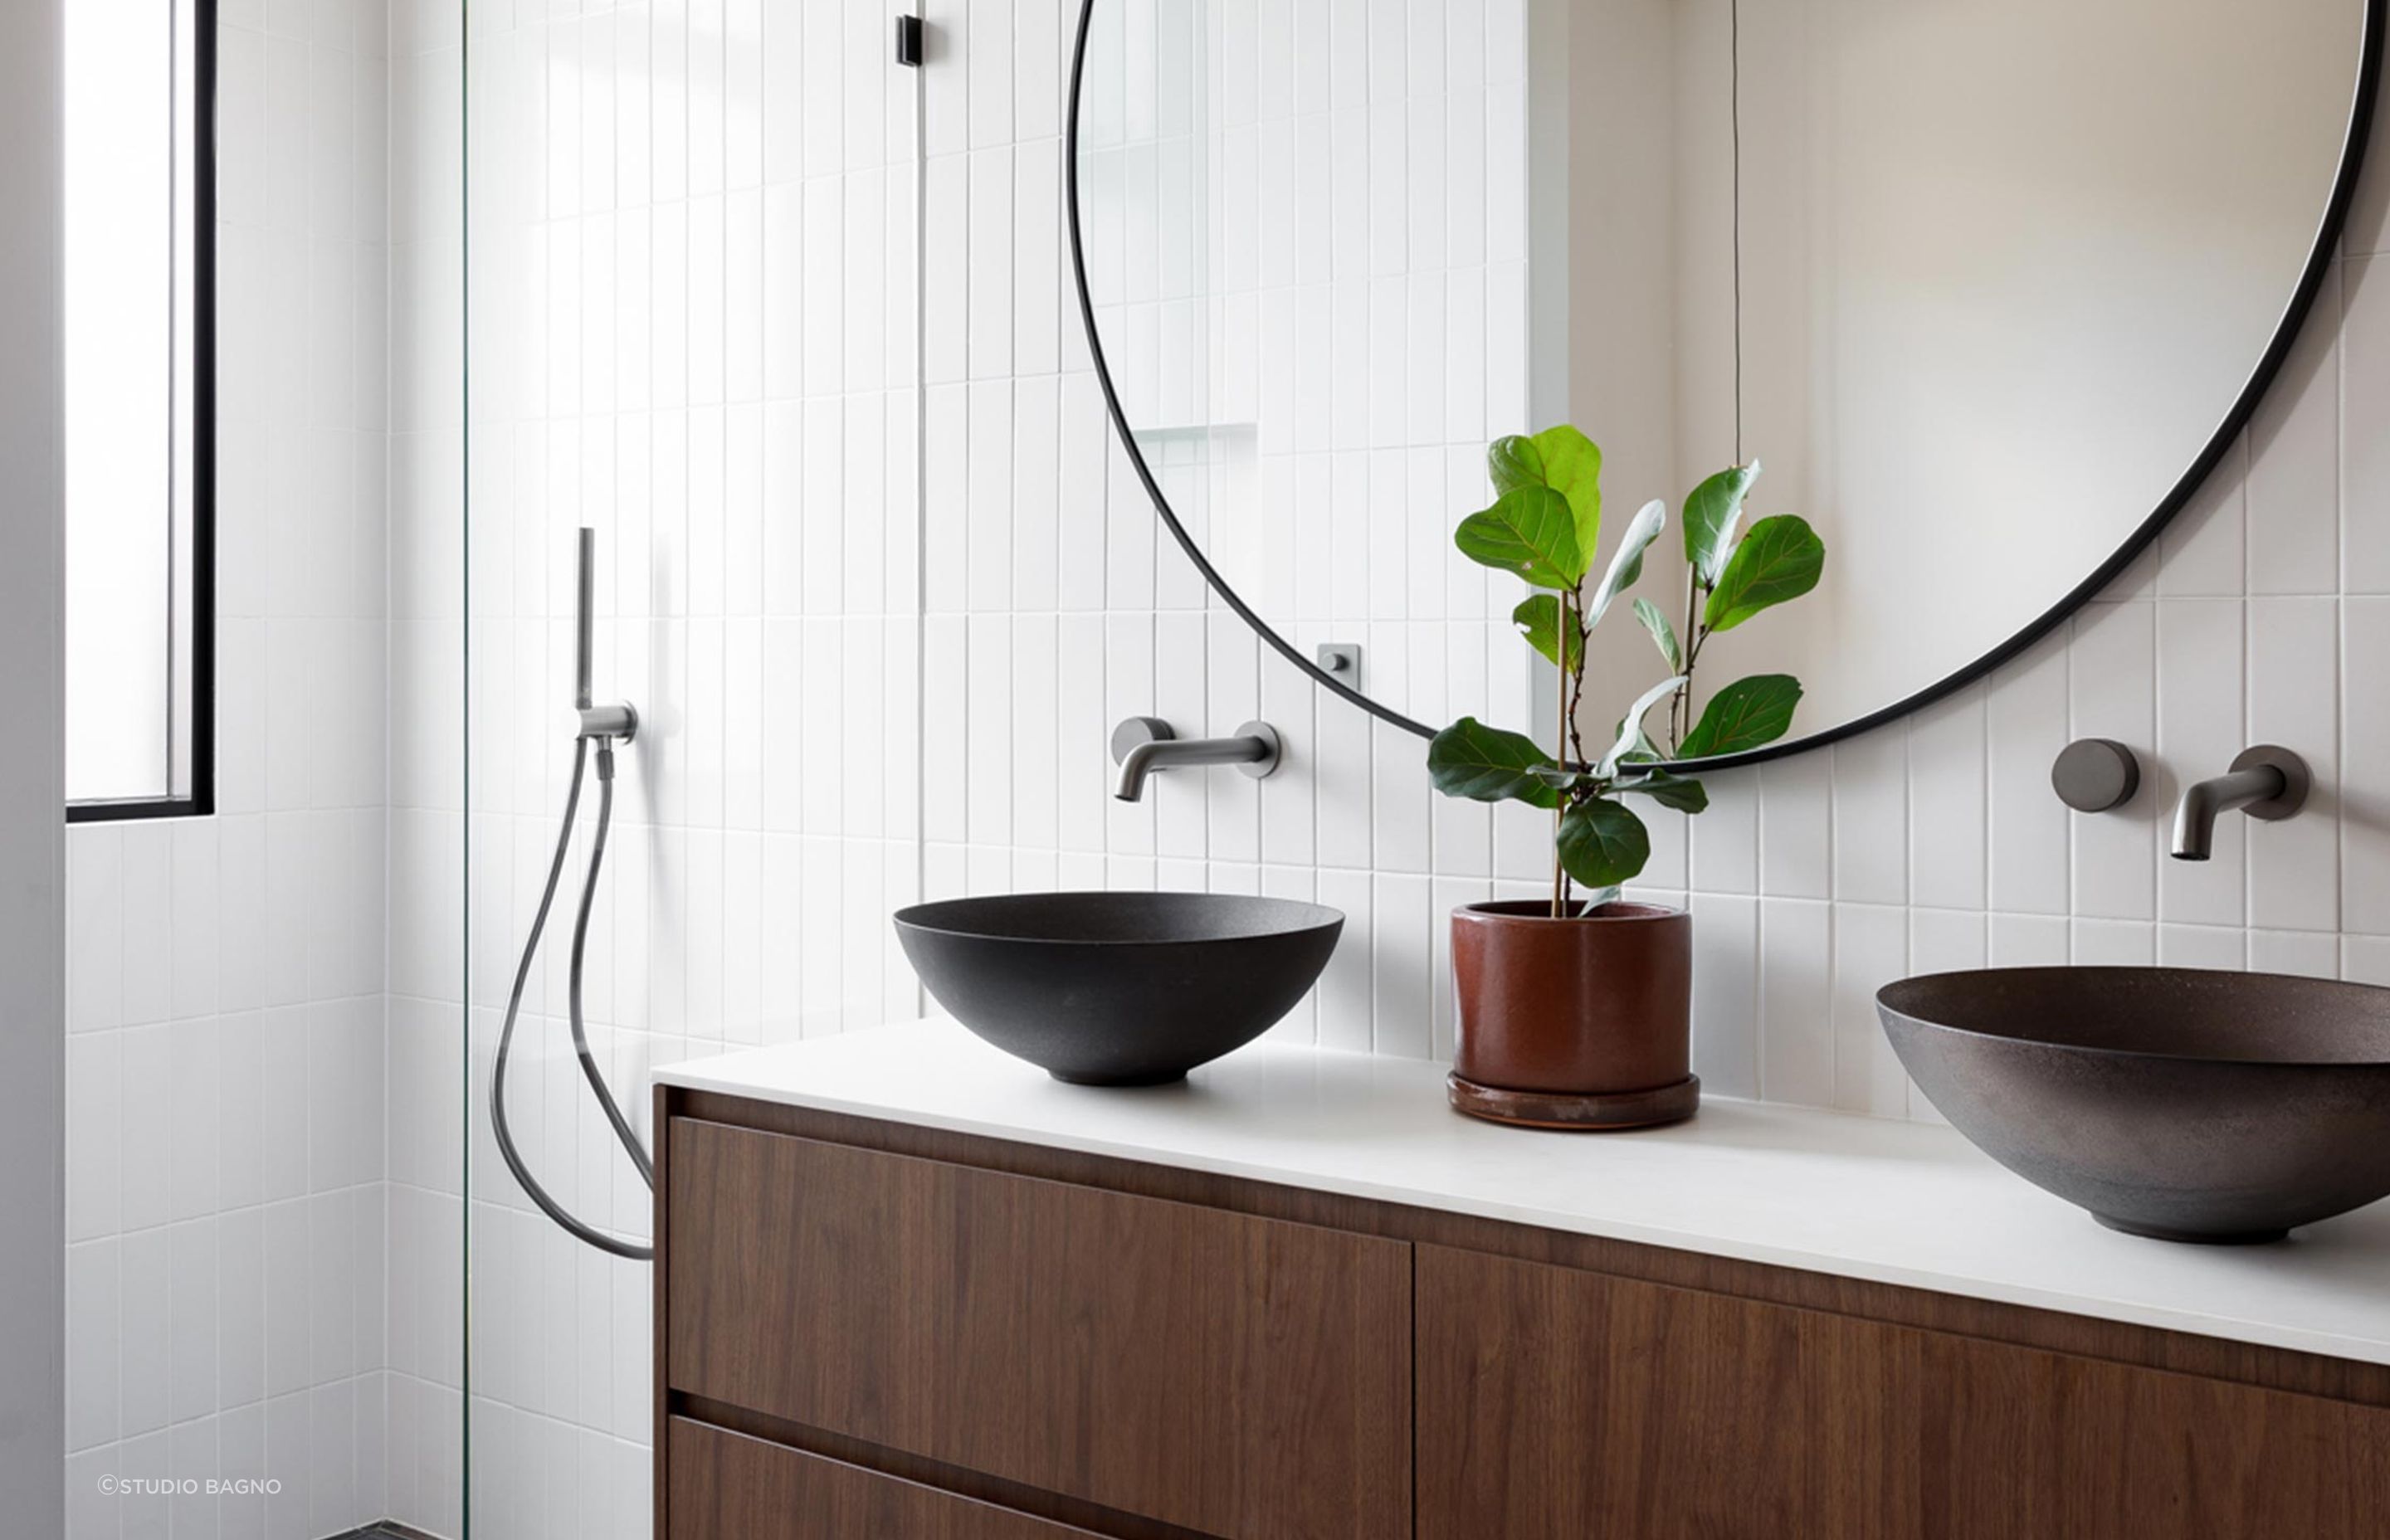 Oasis by Bayside Built showcases modern bathroom styling at its best